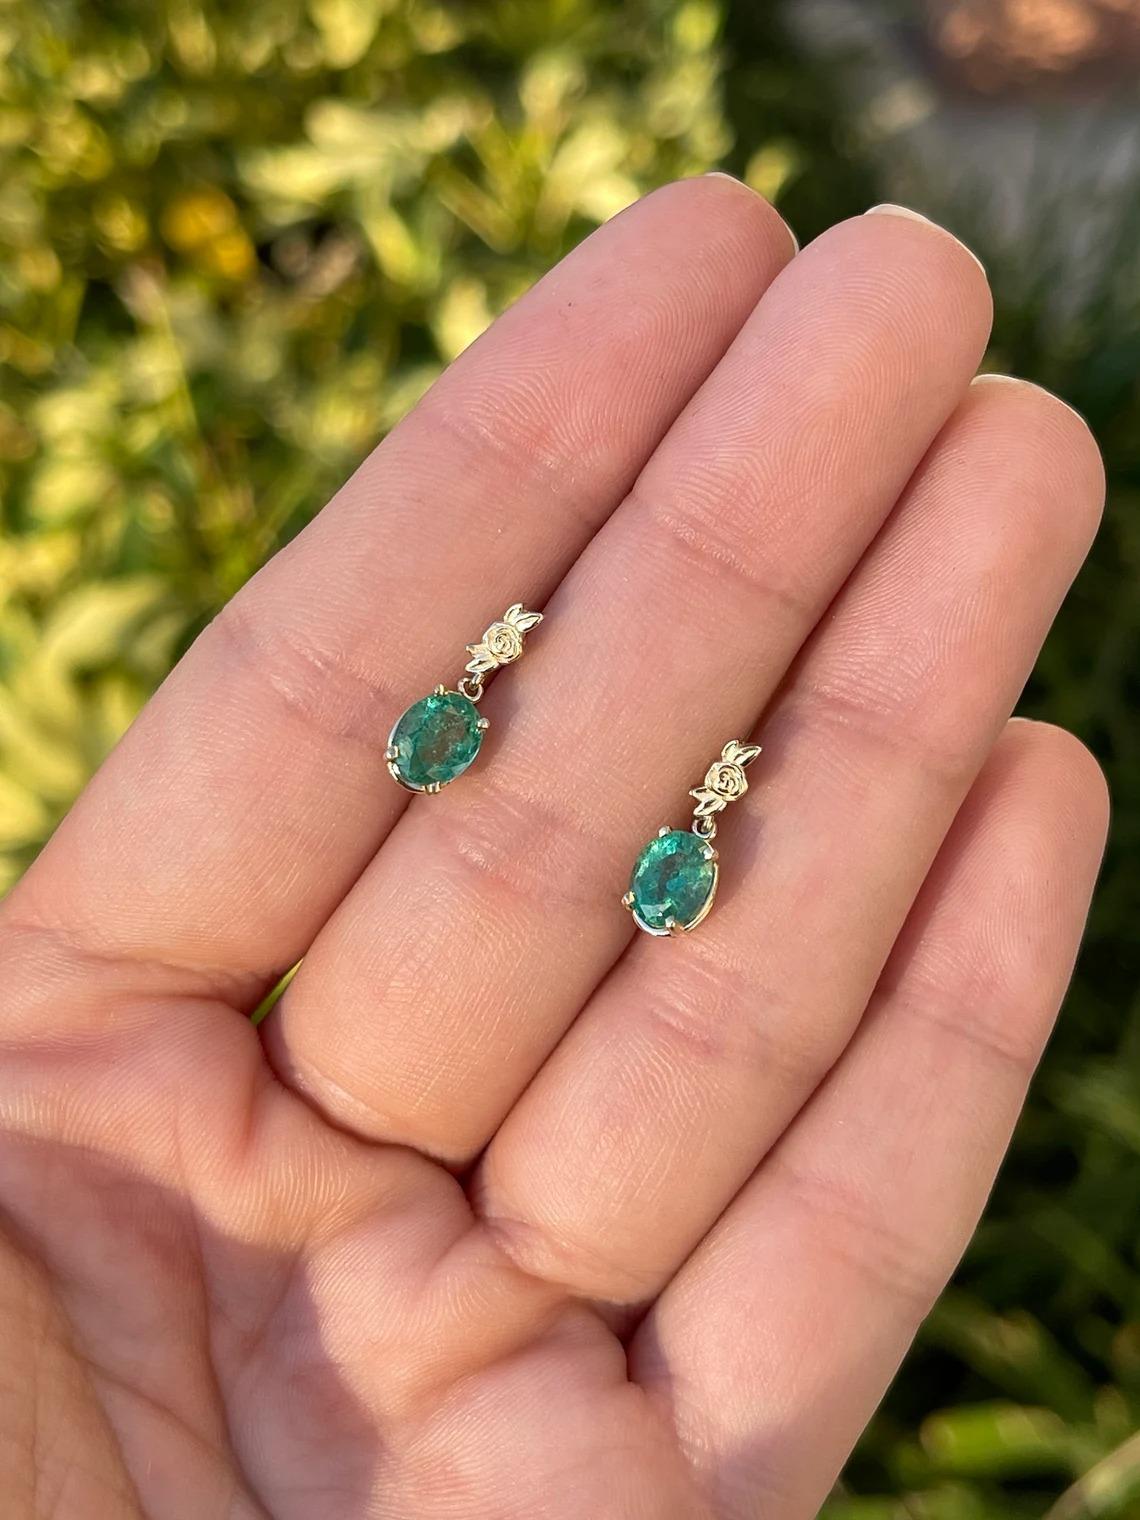 Women's 2.0tcw Natural Bluish-Green Oval Cut Emerald Floral Gold Dangles Earrings For Sale